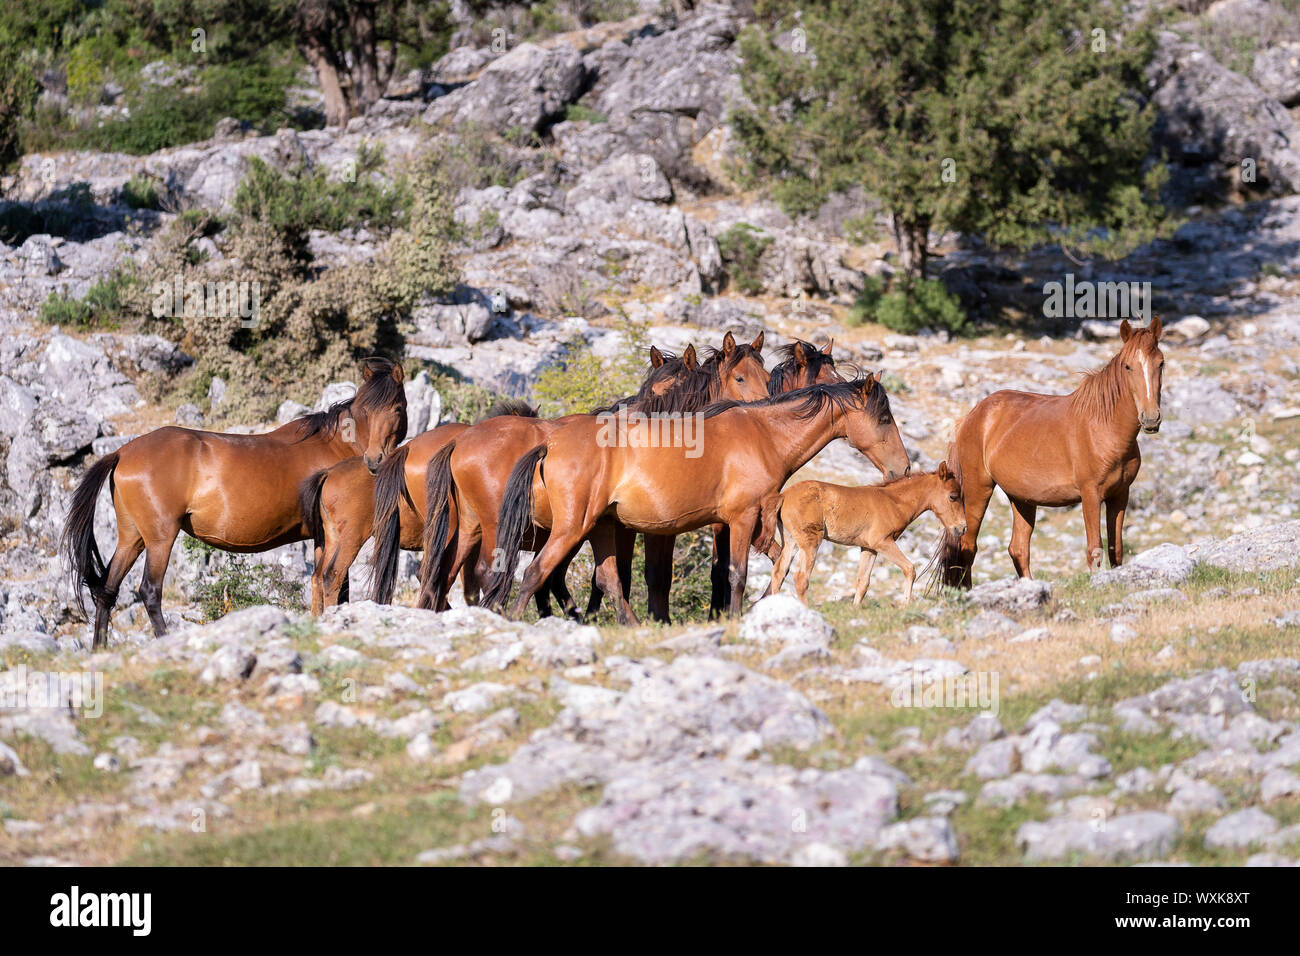 Feral horse, wild horse. Herd of mares with foal standing in landscape. Turkey Stock Photo